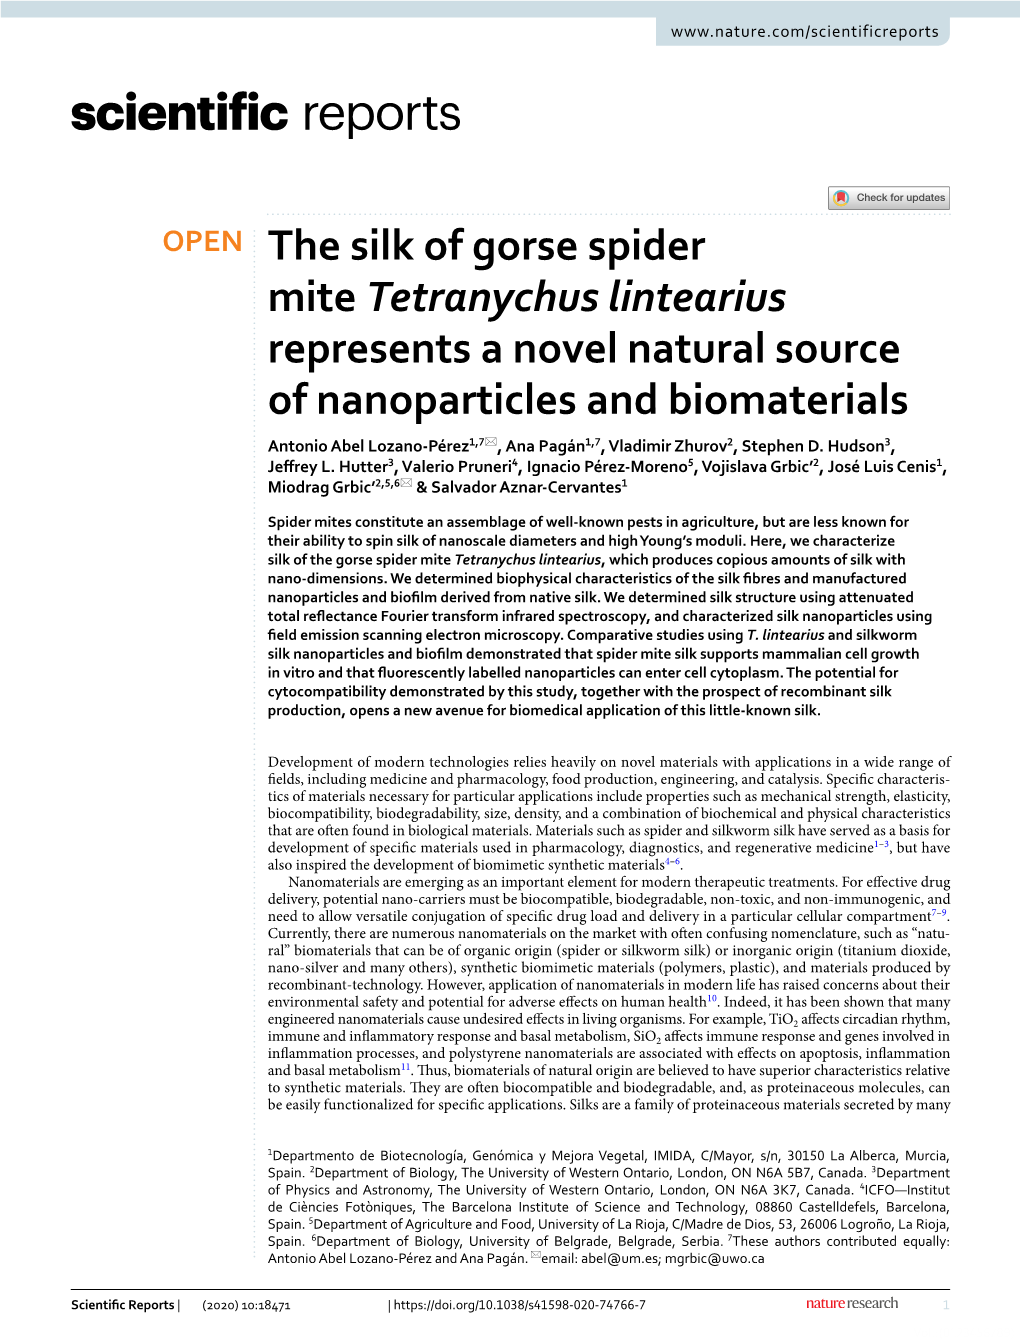 The Silk of Gorse Spider Mite Tetranychus Lintearius Represents a Novel Natural Source of Nanoparticles and Biomaterials